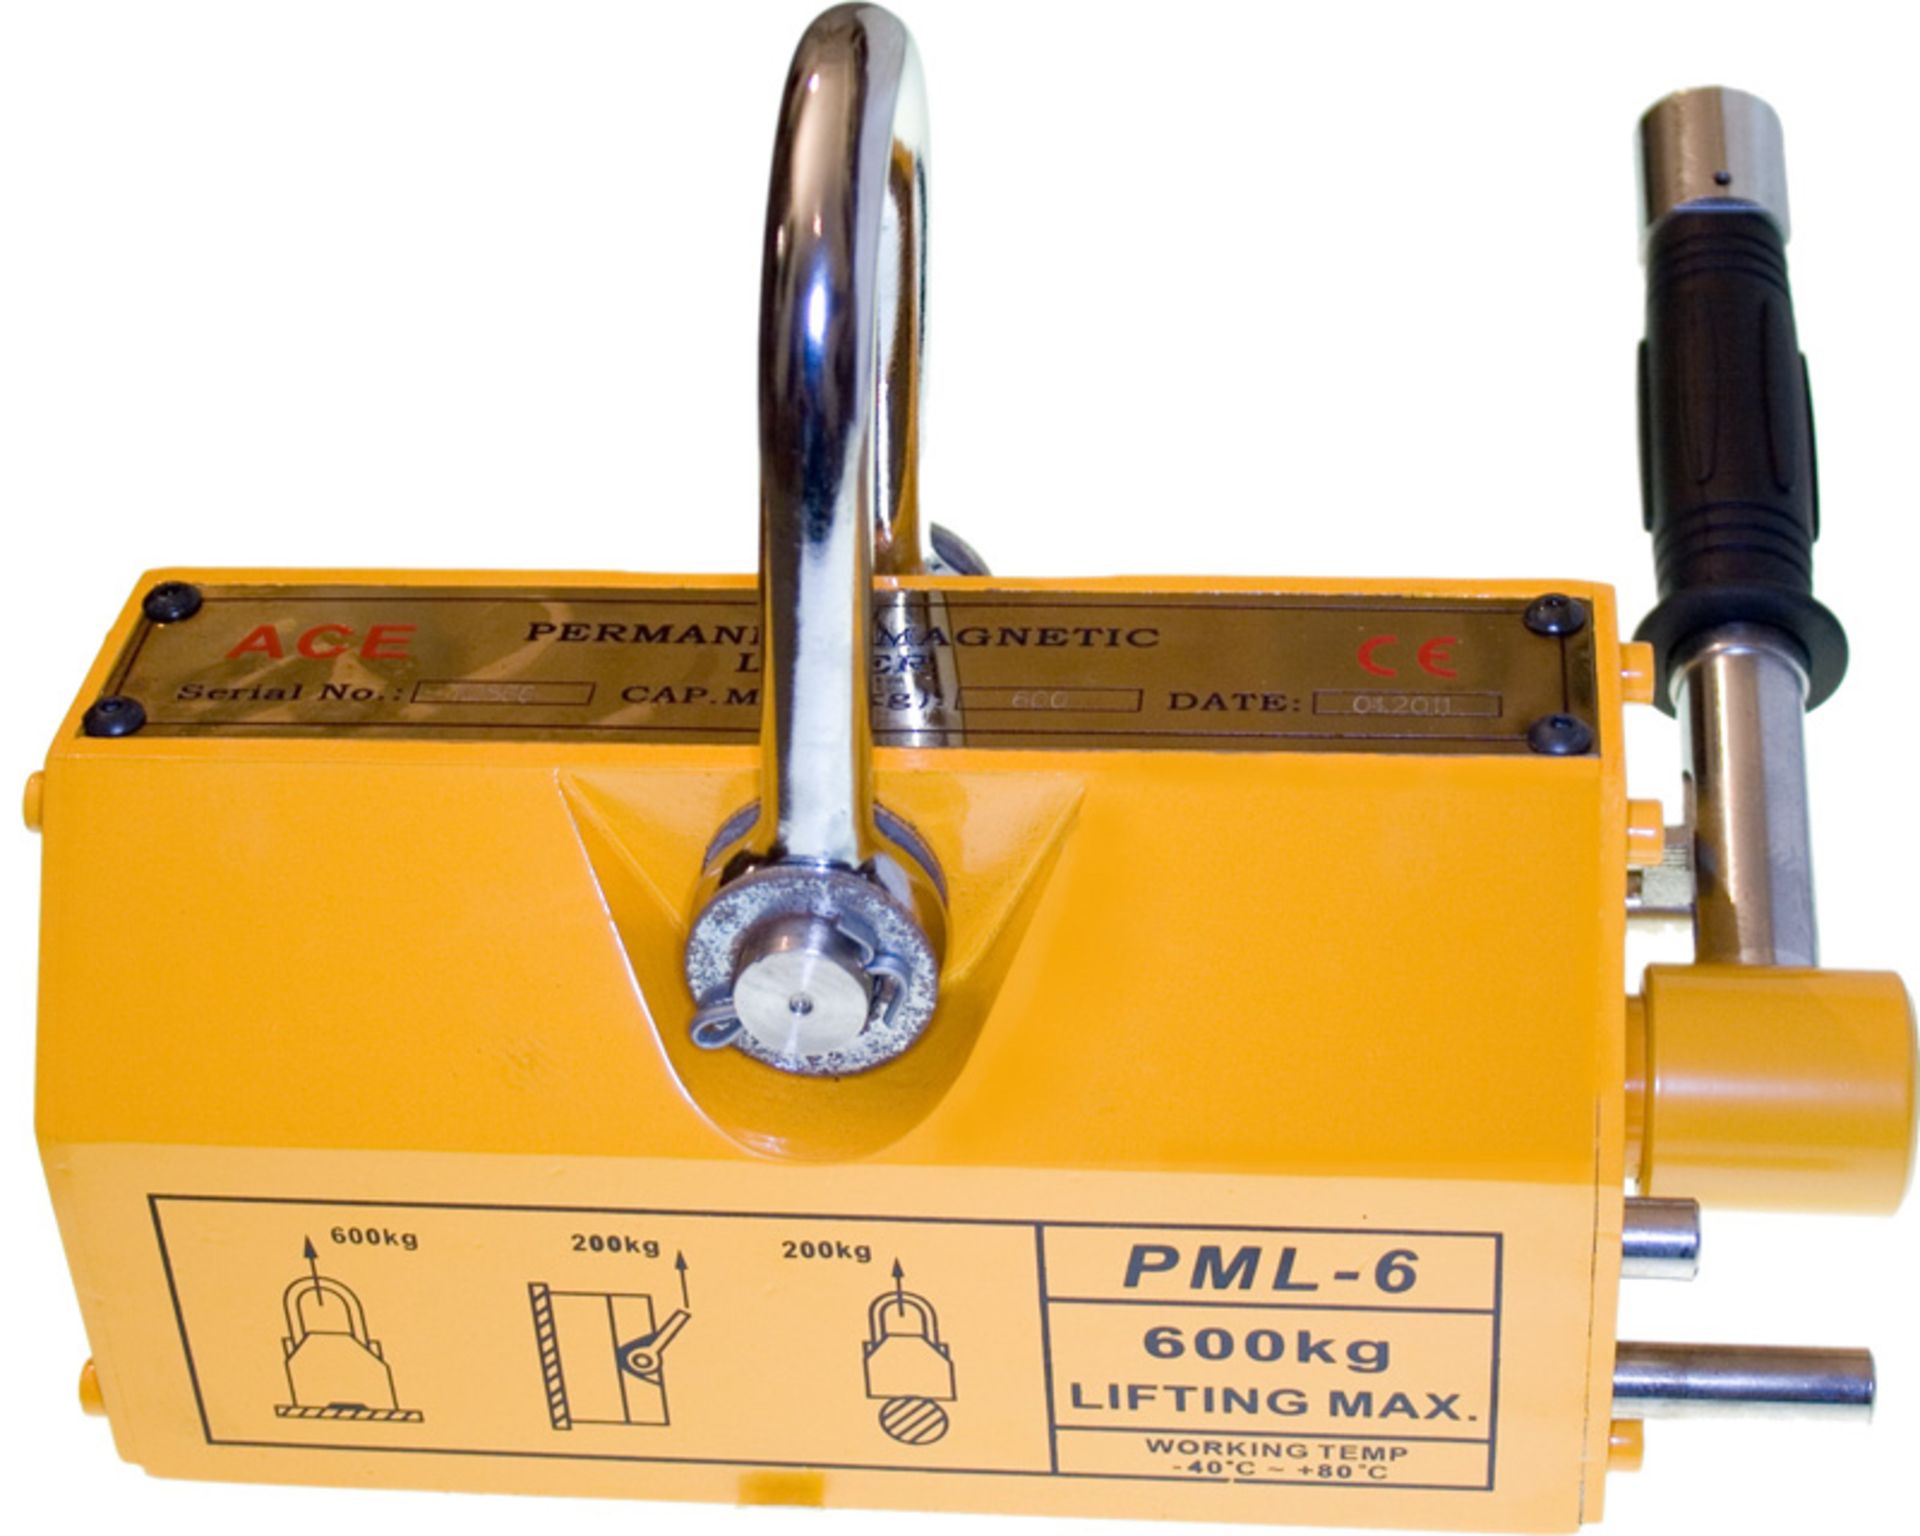 600kg Lifting magnet BRAND NEW - QTY: 1 600kg lifting capacity. Designed for easy and efficient